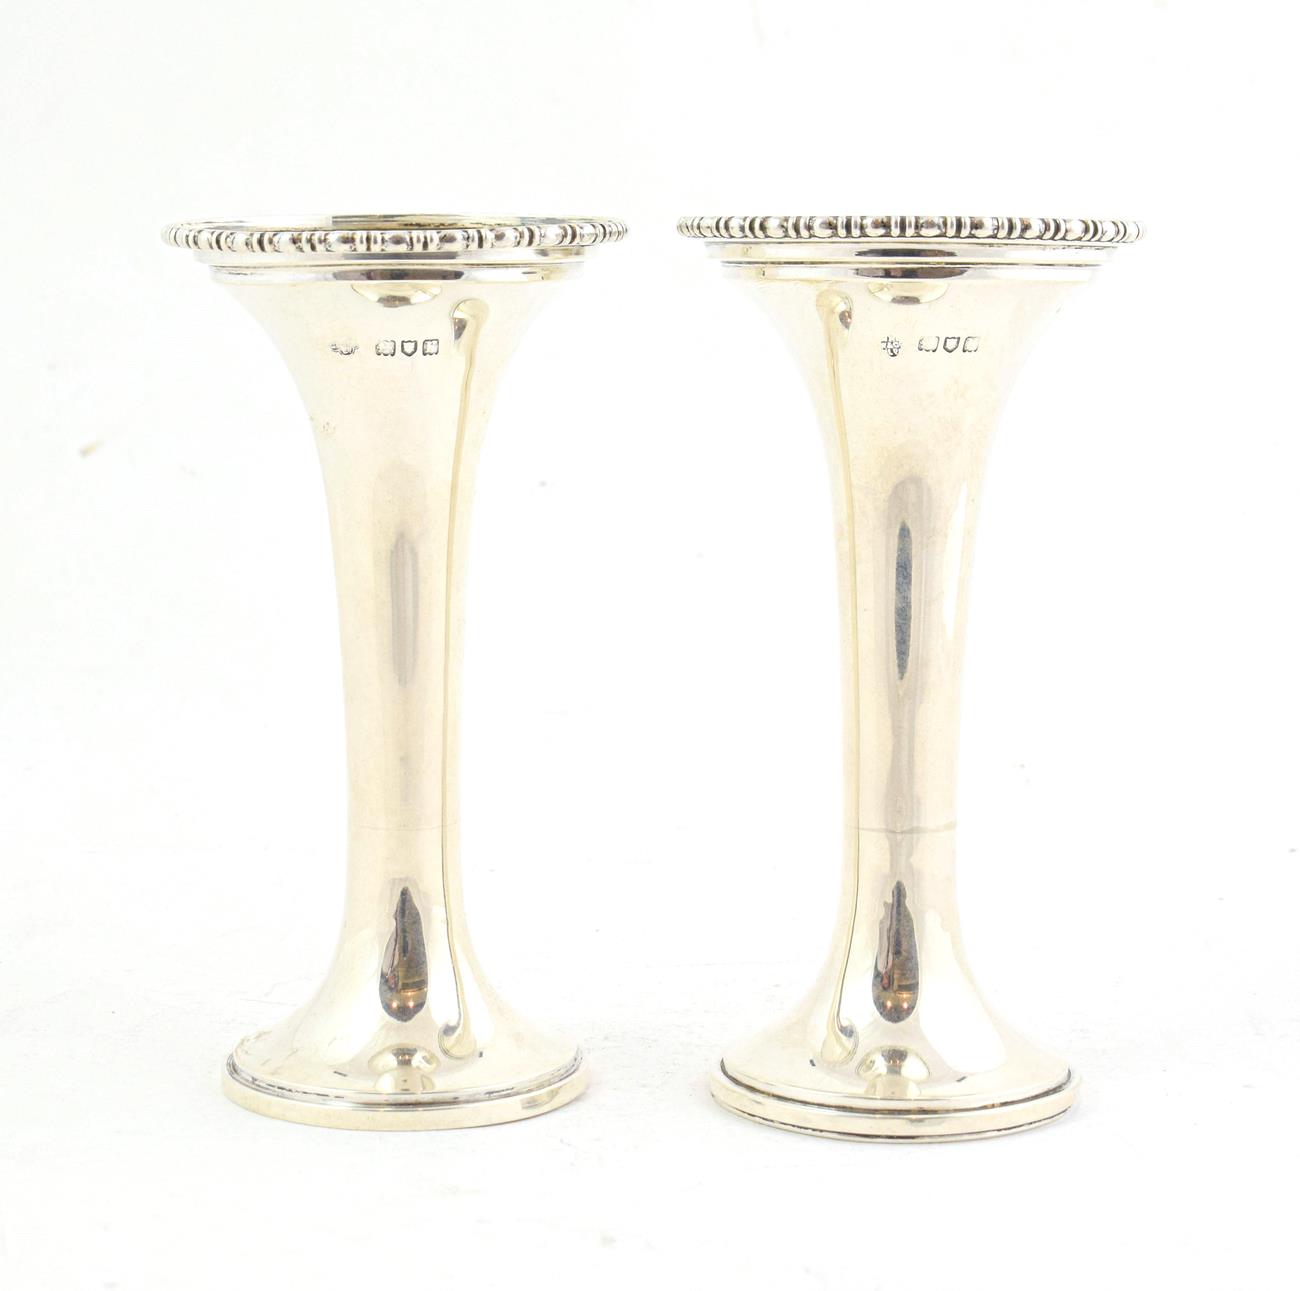 Lot 42 - A Pair of George V Silver Vases, by Horace Woodward and Co. Ltd., London, 1912, Retailed by The...